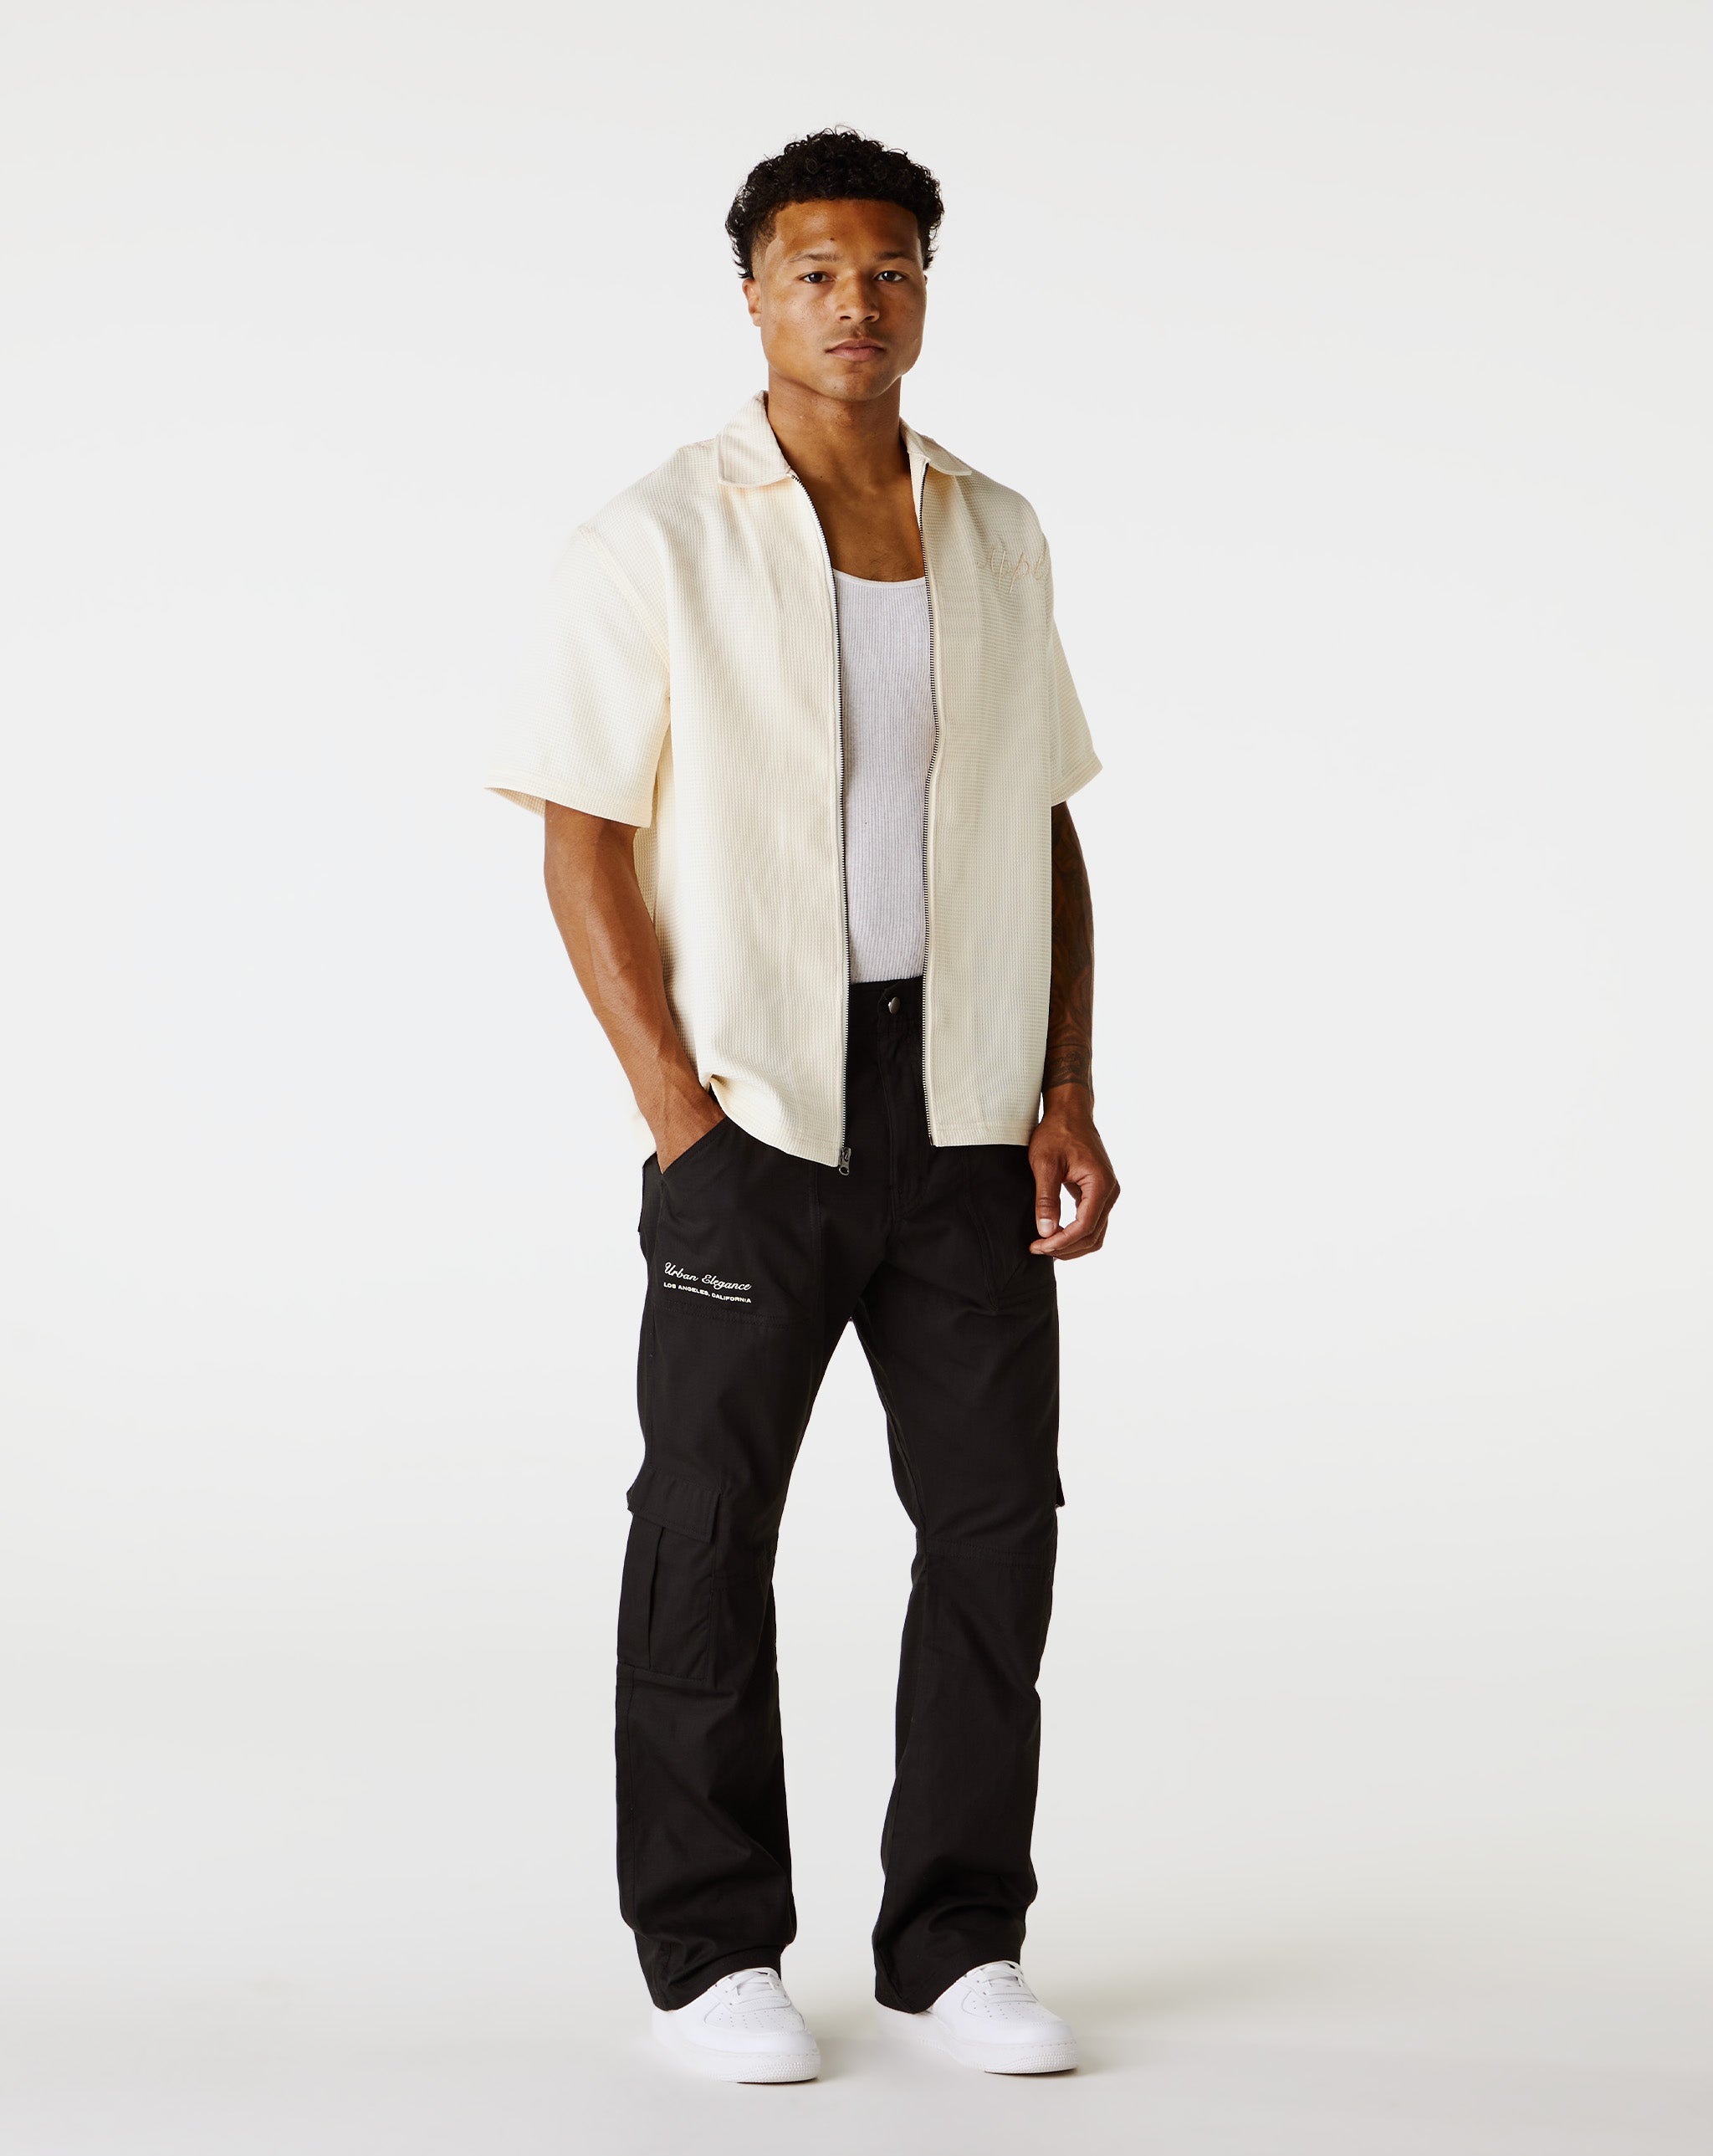 By Appointment Only Kevin Zipped Collared Shirt - Rule of Next Apparel